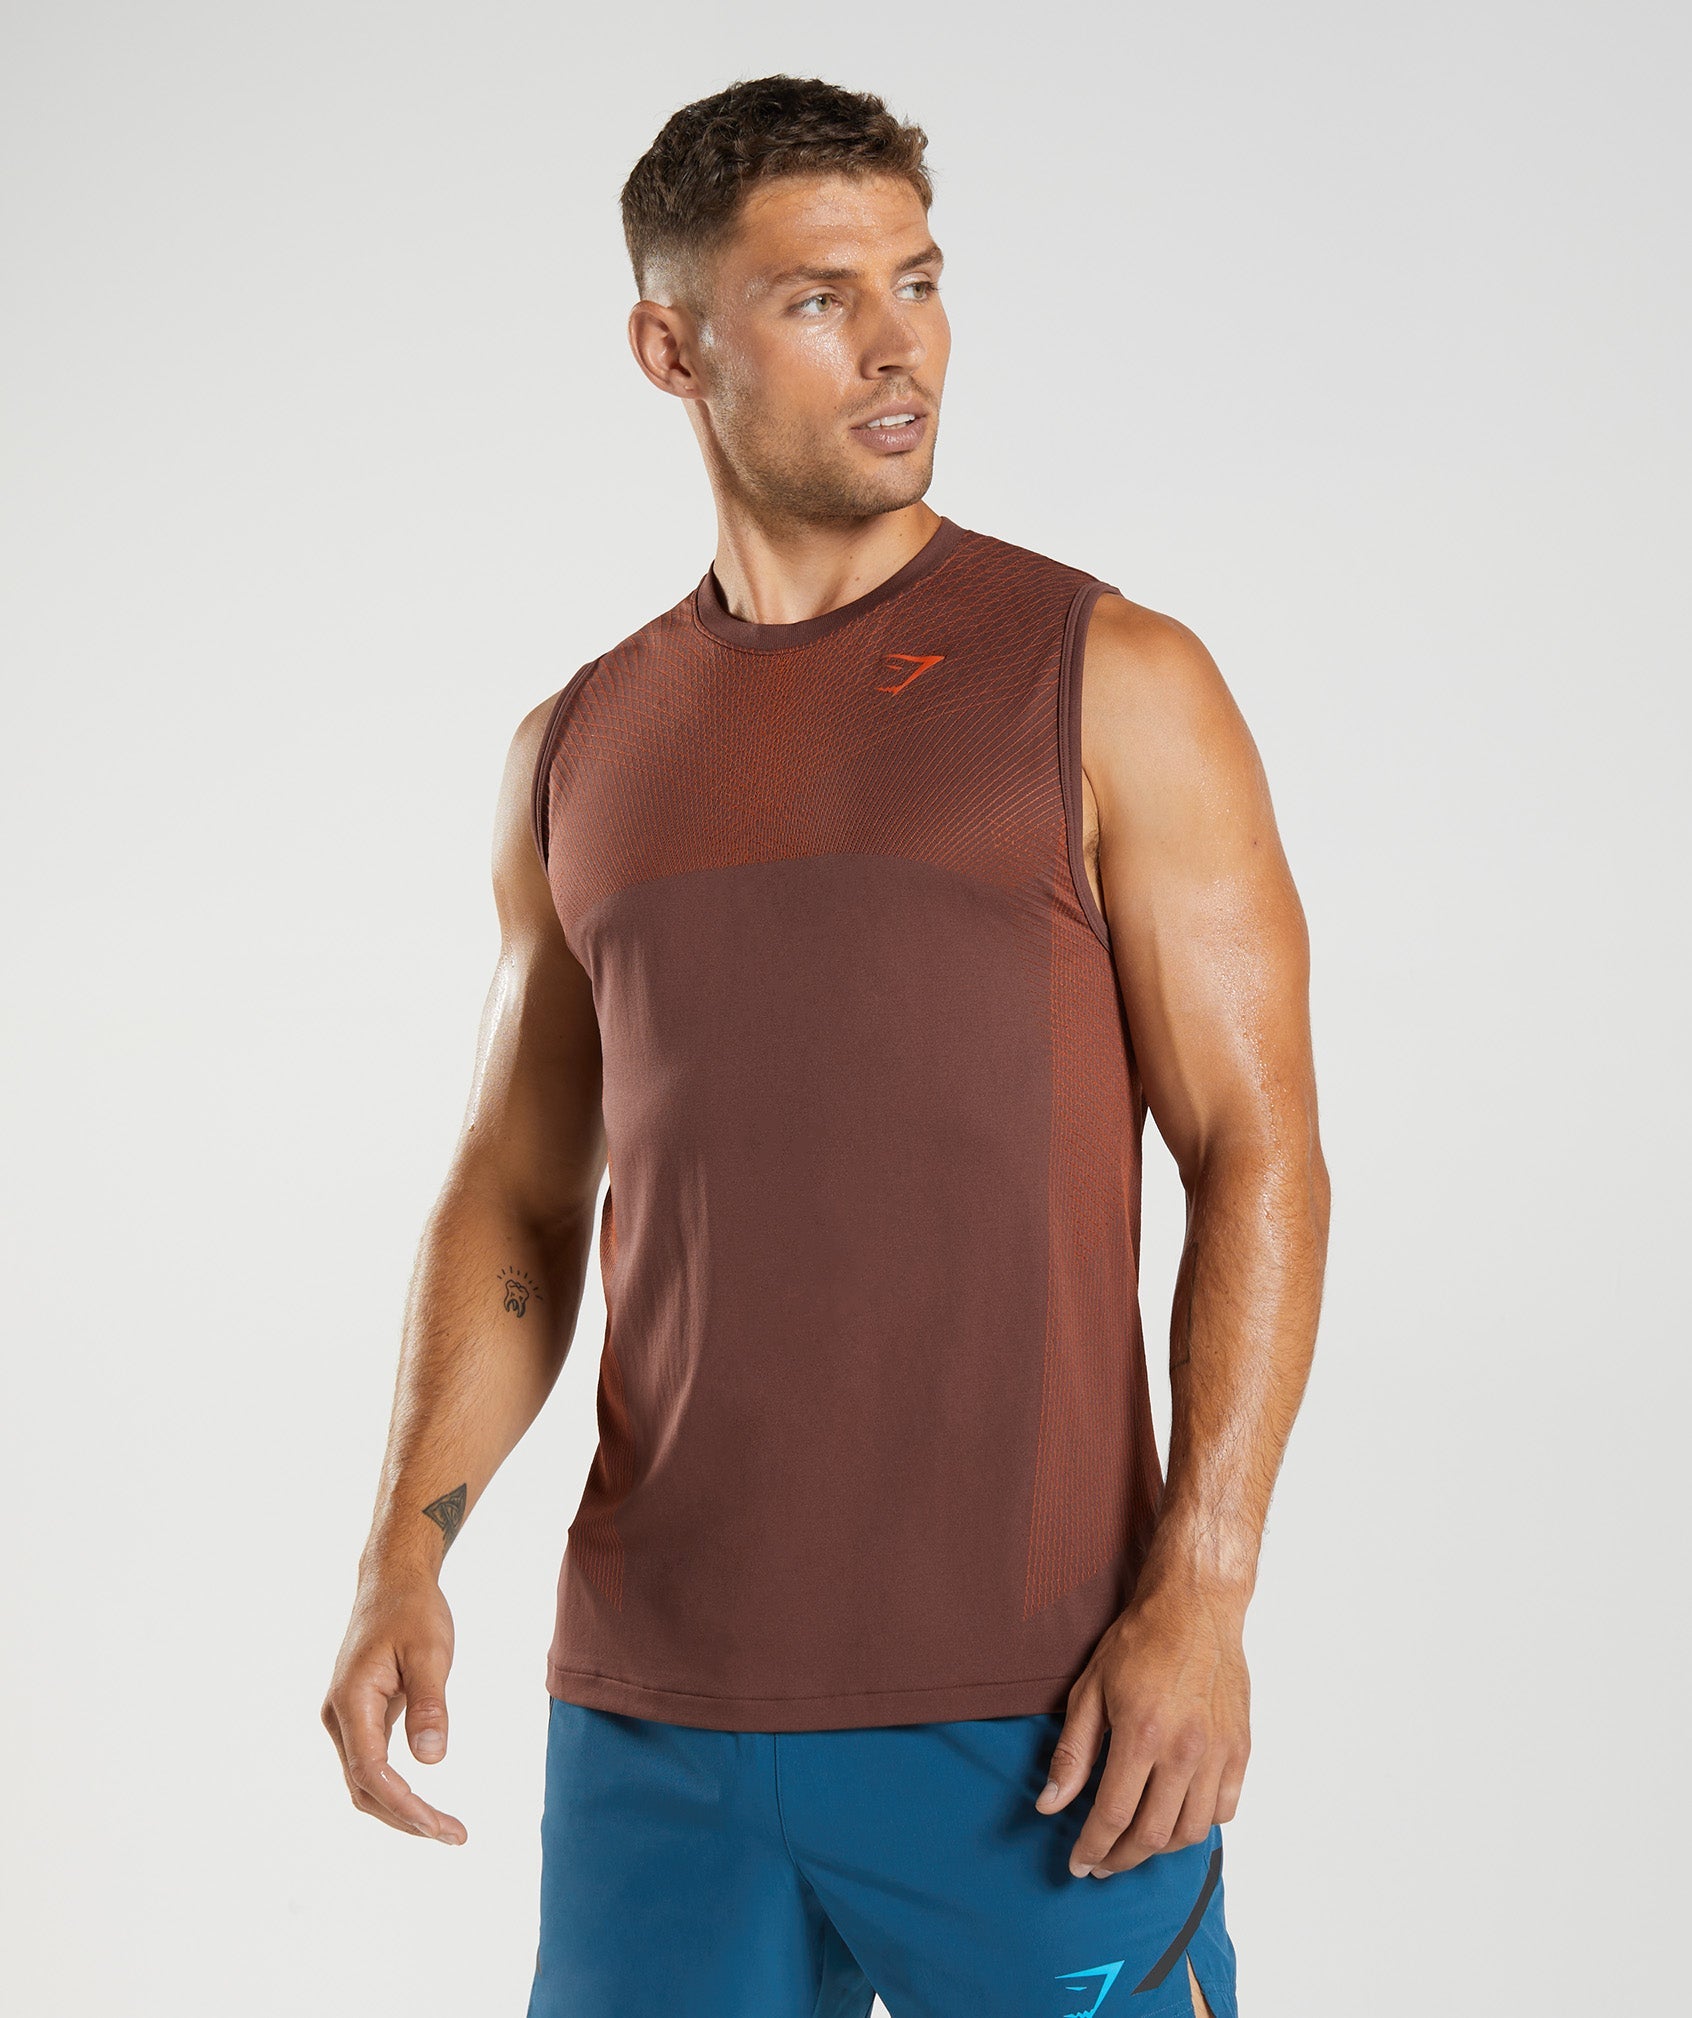 Apex Seamless Tank in Cherry Brown/Pepper Red - view 1